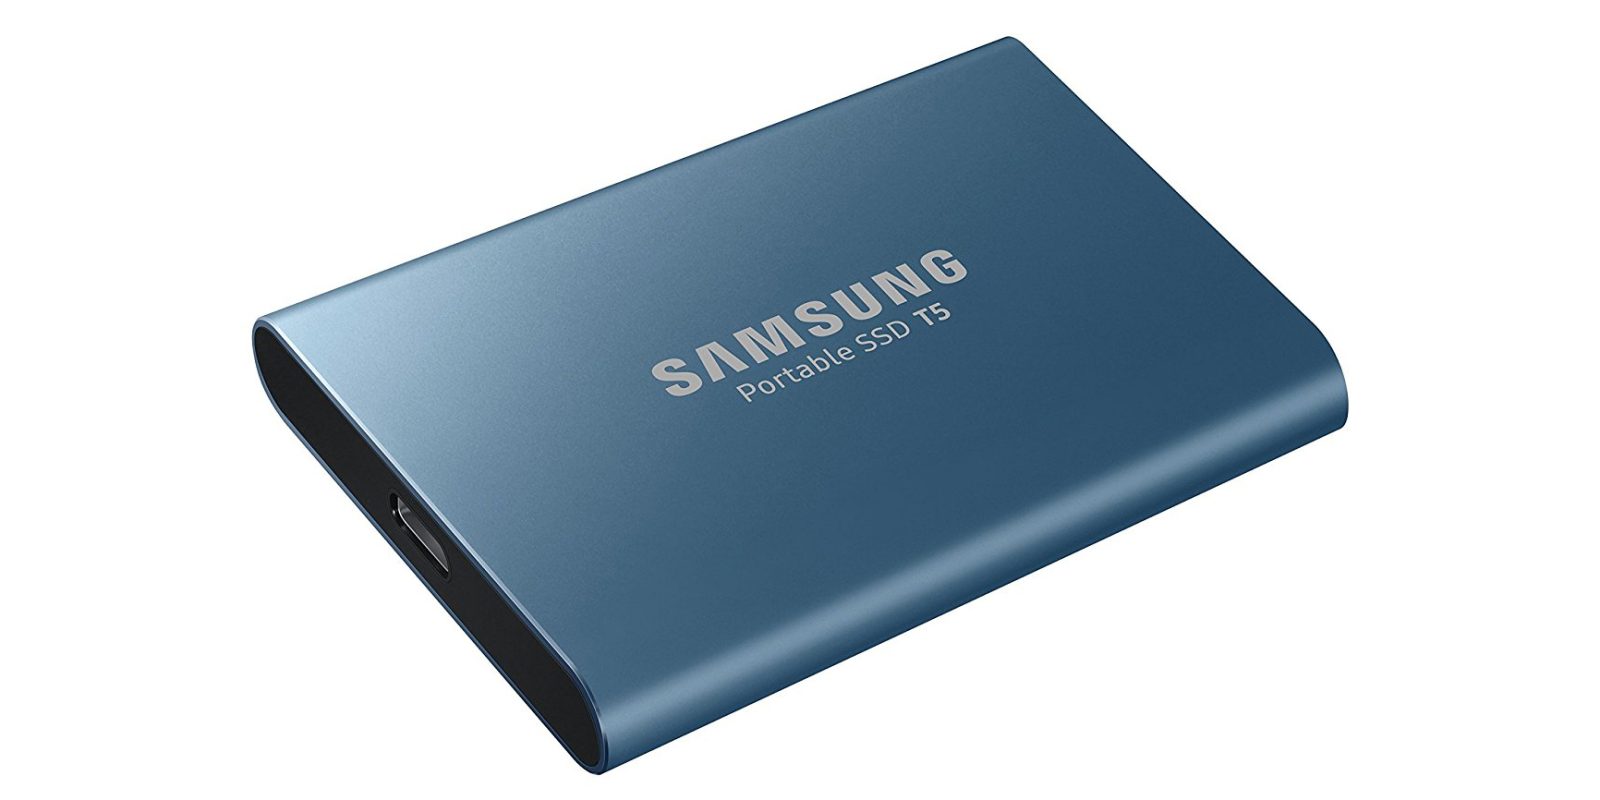 https://9to5mac.com/wp-content/uploads/sites/6/2017/08/samsung-t5-portable-ssd.jpg?quality=82&strip=all&w=1600